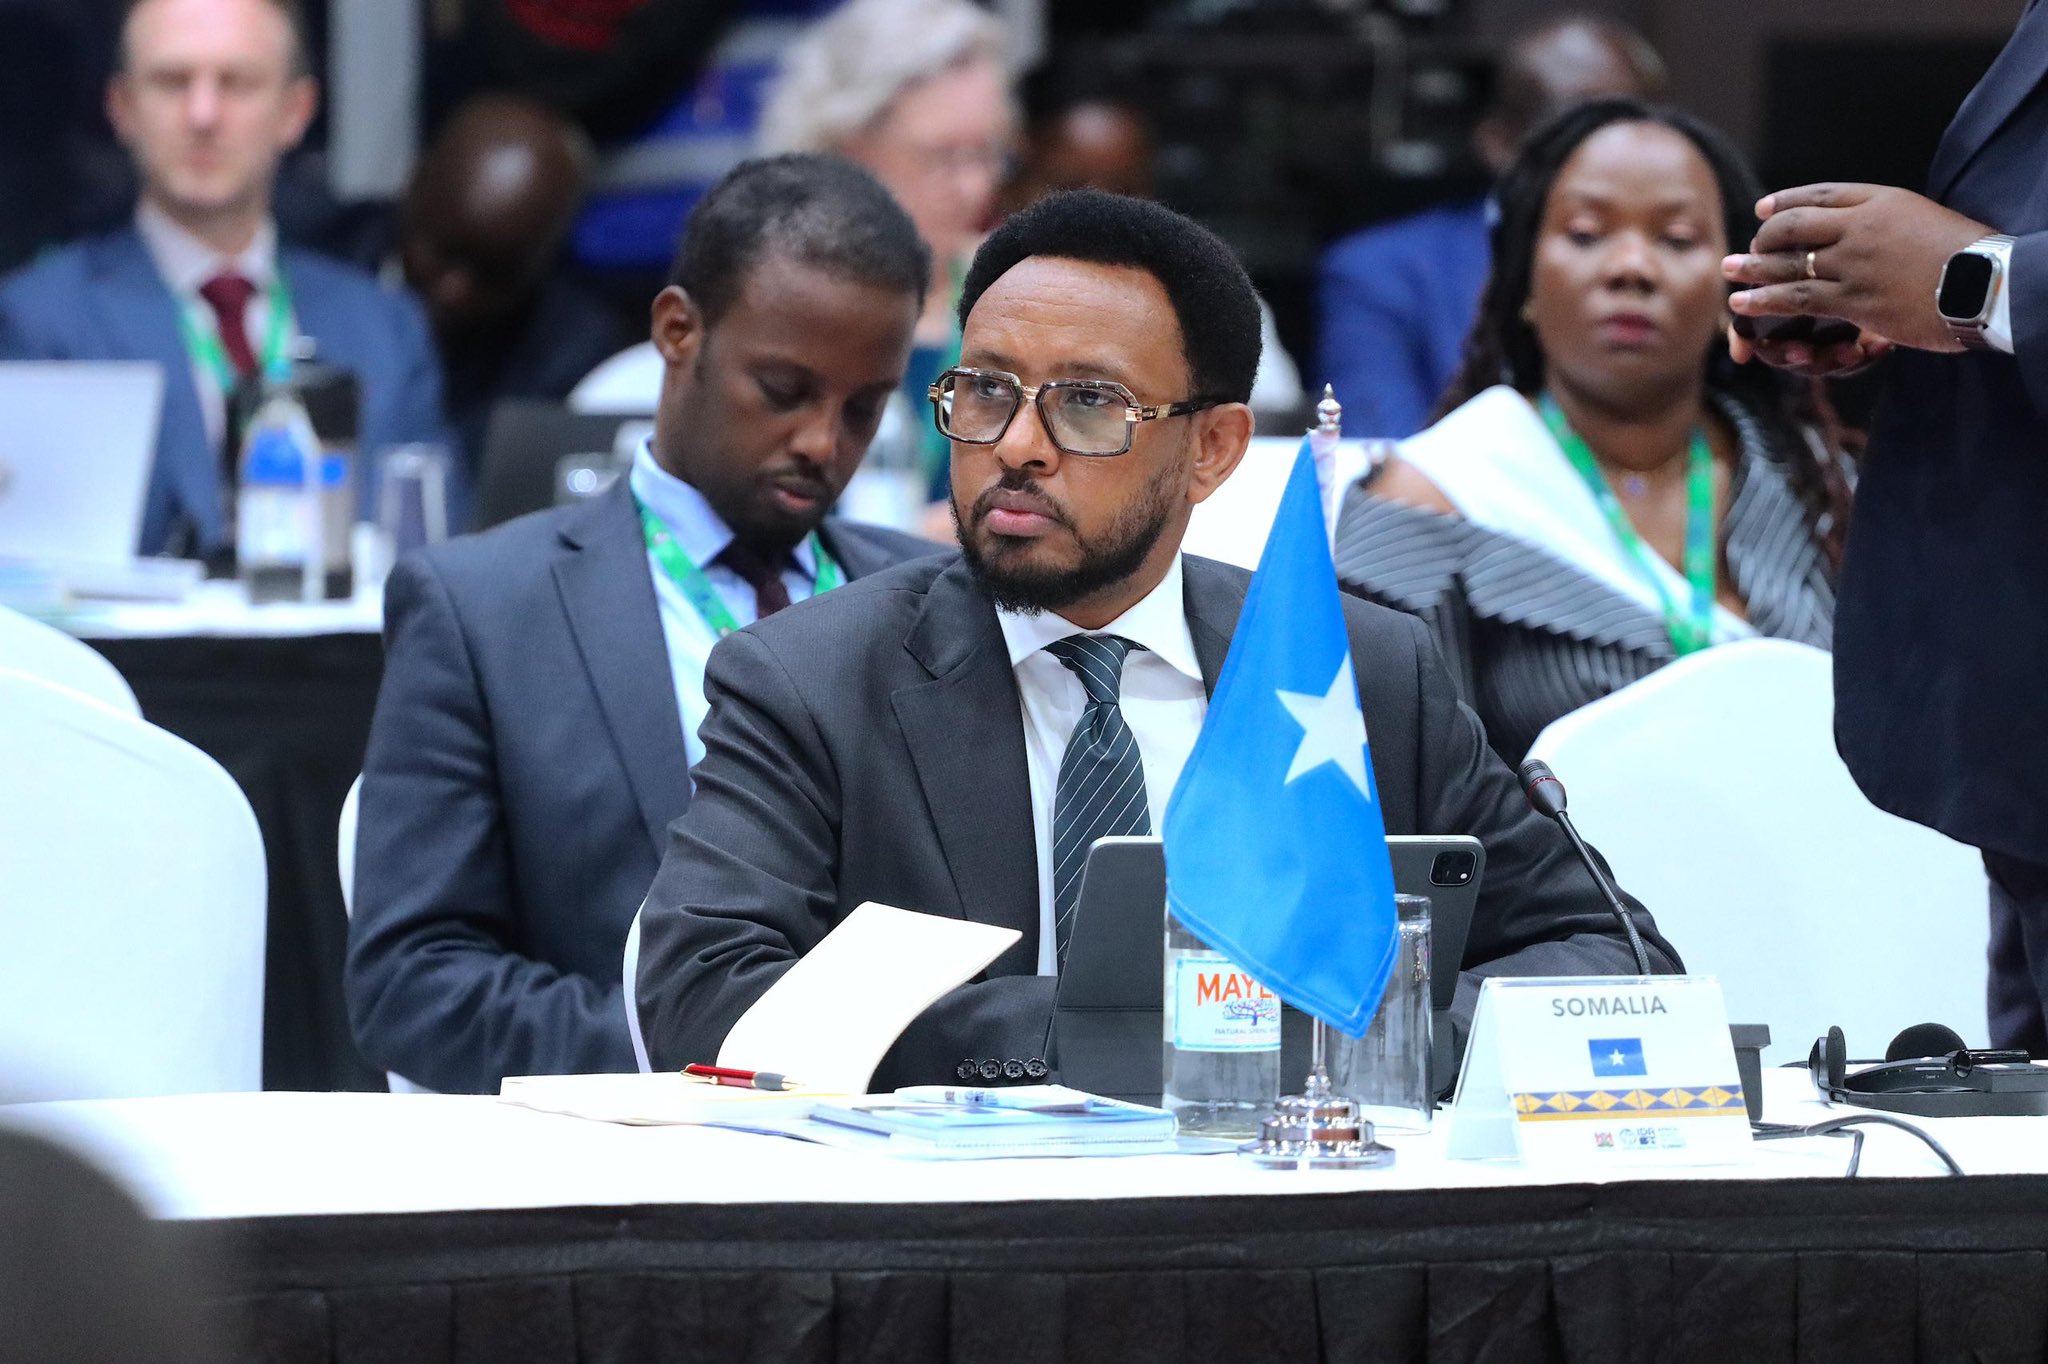 SOMALIA’S MINISTER OF FINANCE ACCUSED OF VIOLATING BUDGET MANAGEMENT LAWS THROUGH DIVERSION OF TSA FUNDS